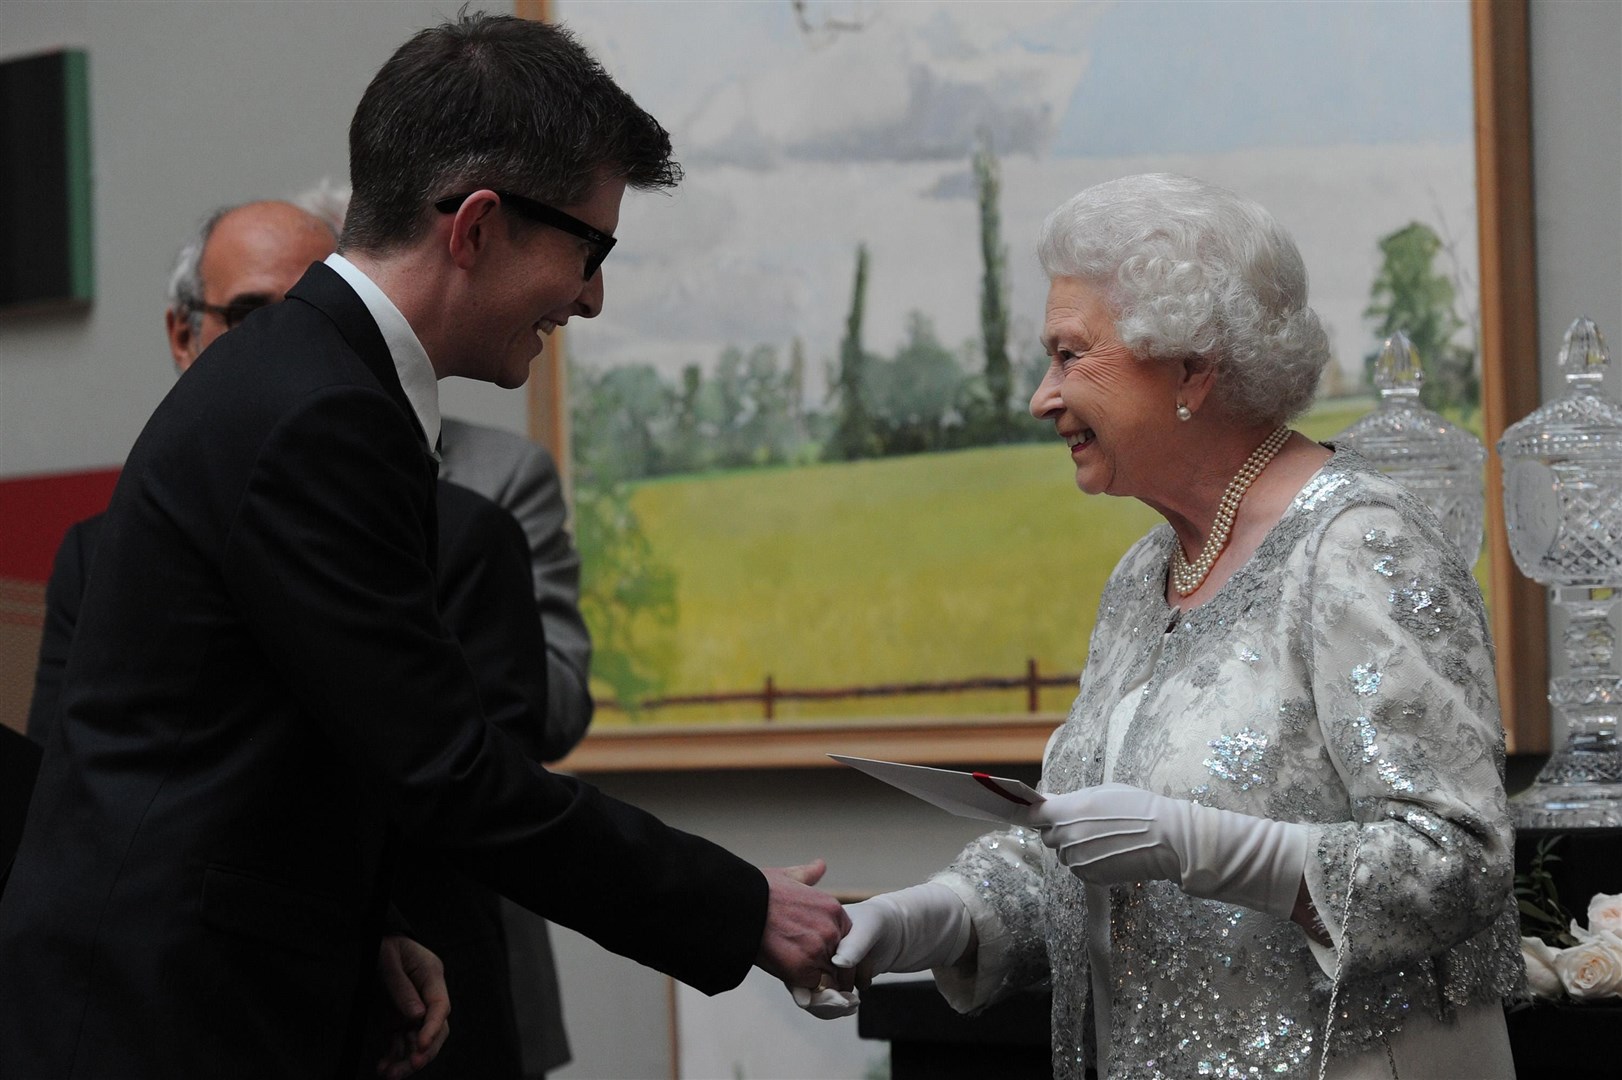 The Queen presents Gareth Malone with a Diamond Award for his contribution to British culture (Carl Court/PA)